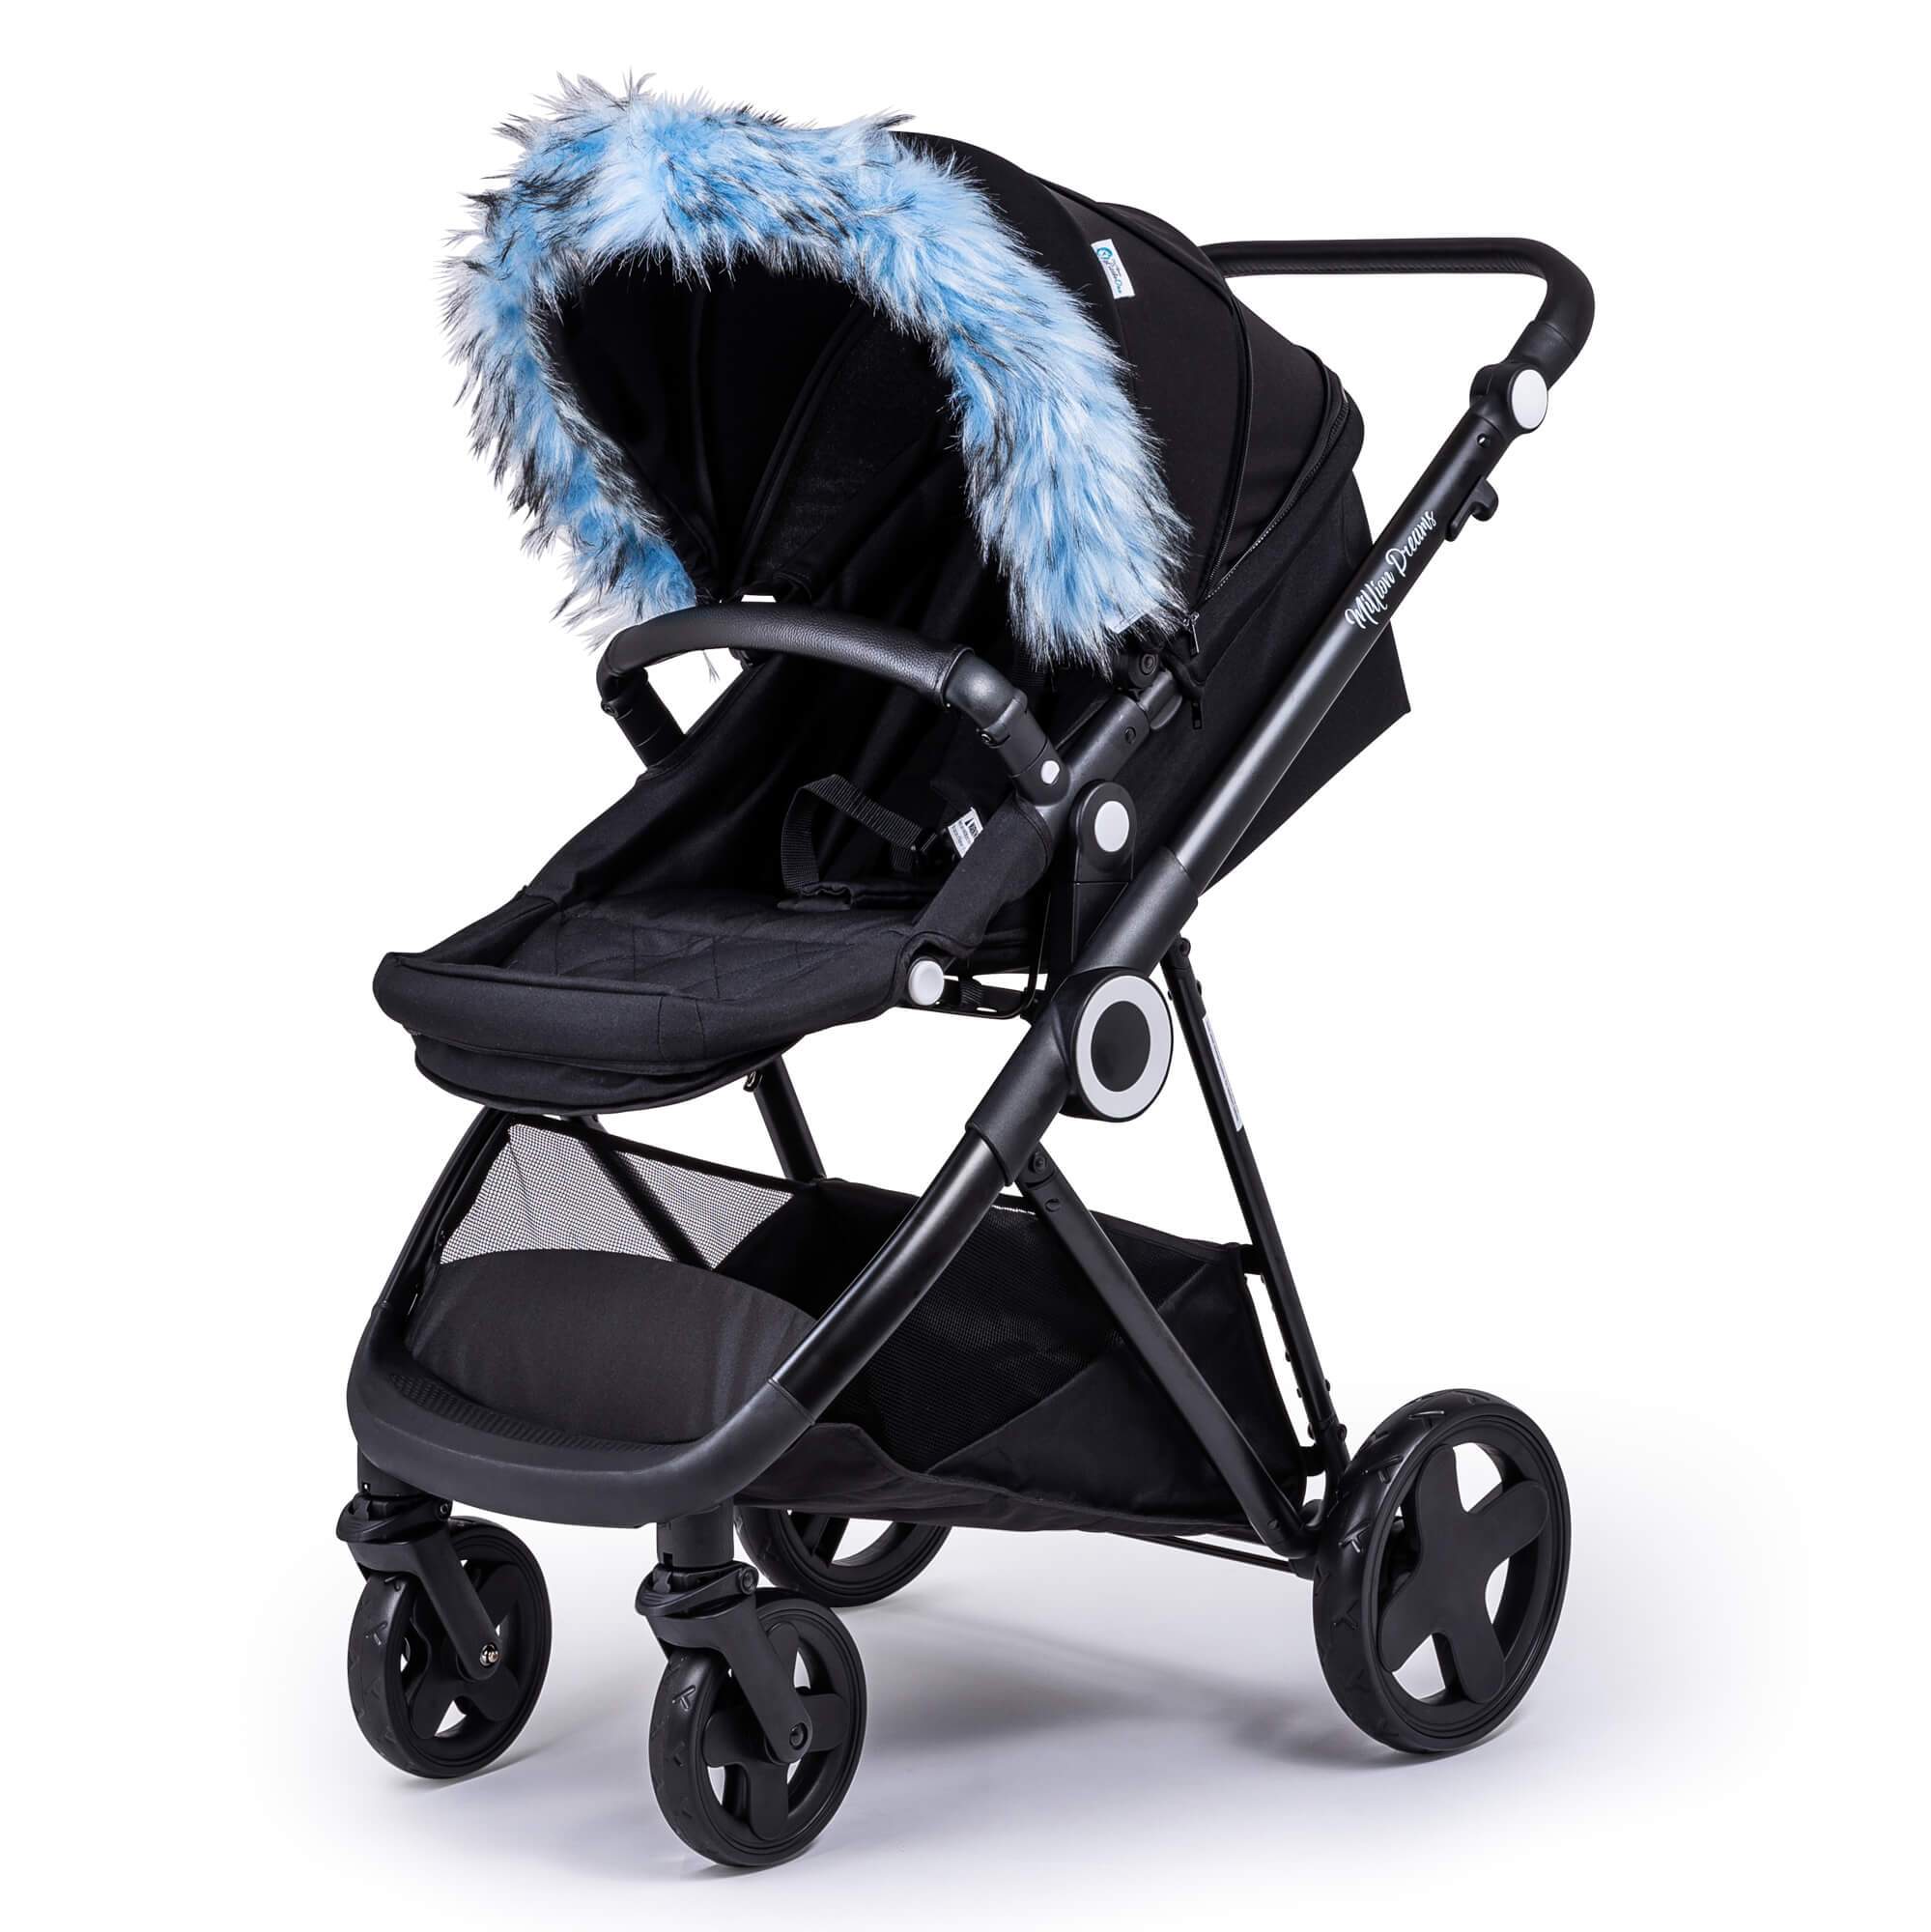 Pram Fur Hood Trim Attachment For Pushchair Compatible with Ickle Bubba - Light Blue / Fits All Models | For Your Little One